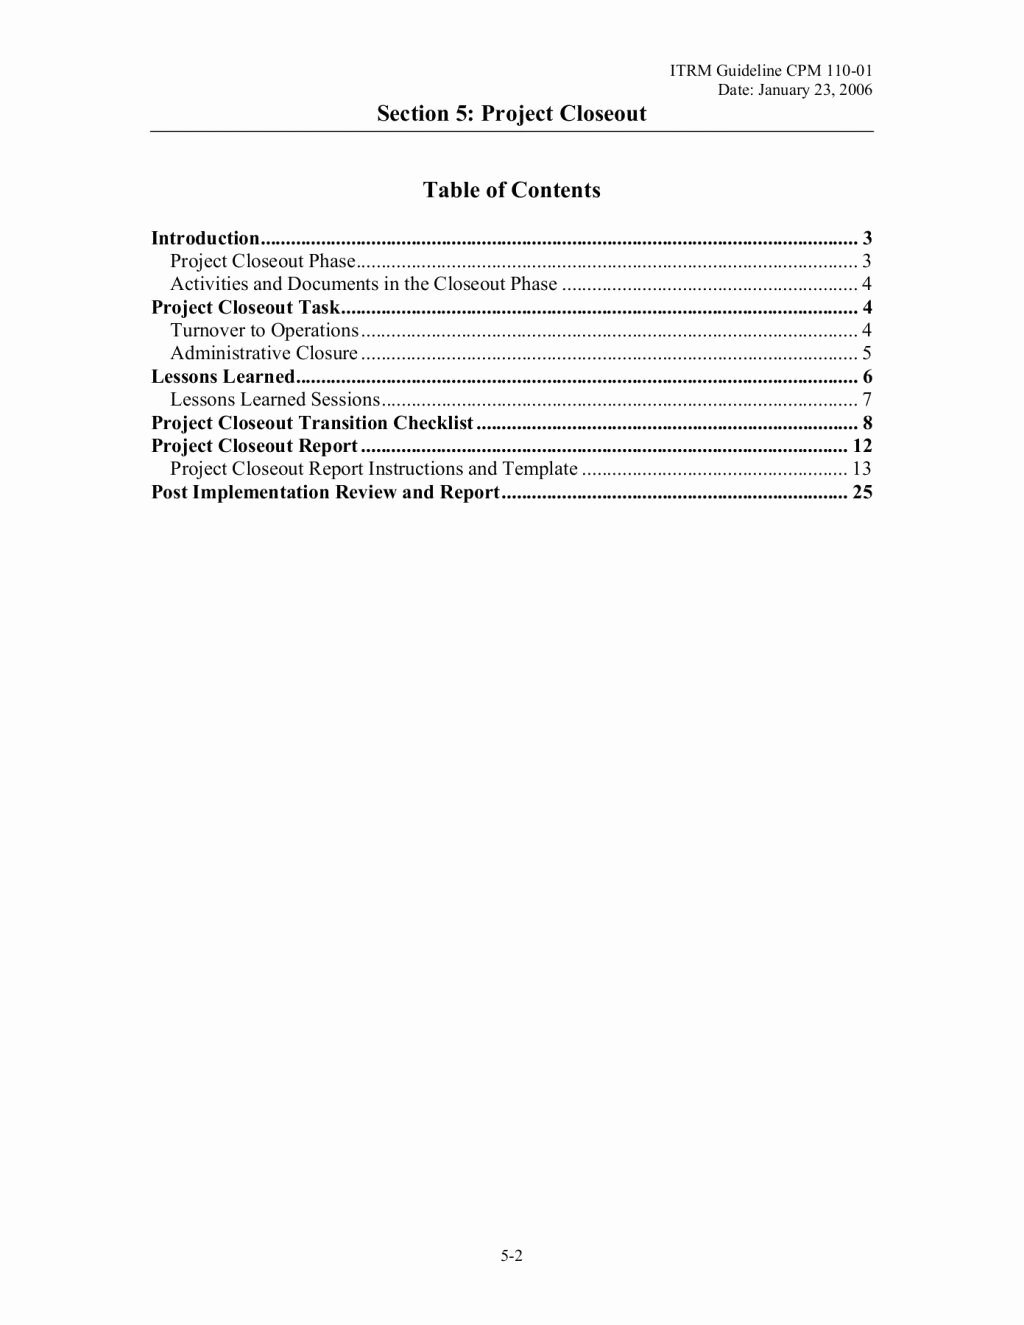 Project Closeout Report Template Elegant Project Closeout Checklist Sample with Closure Template